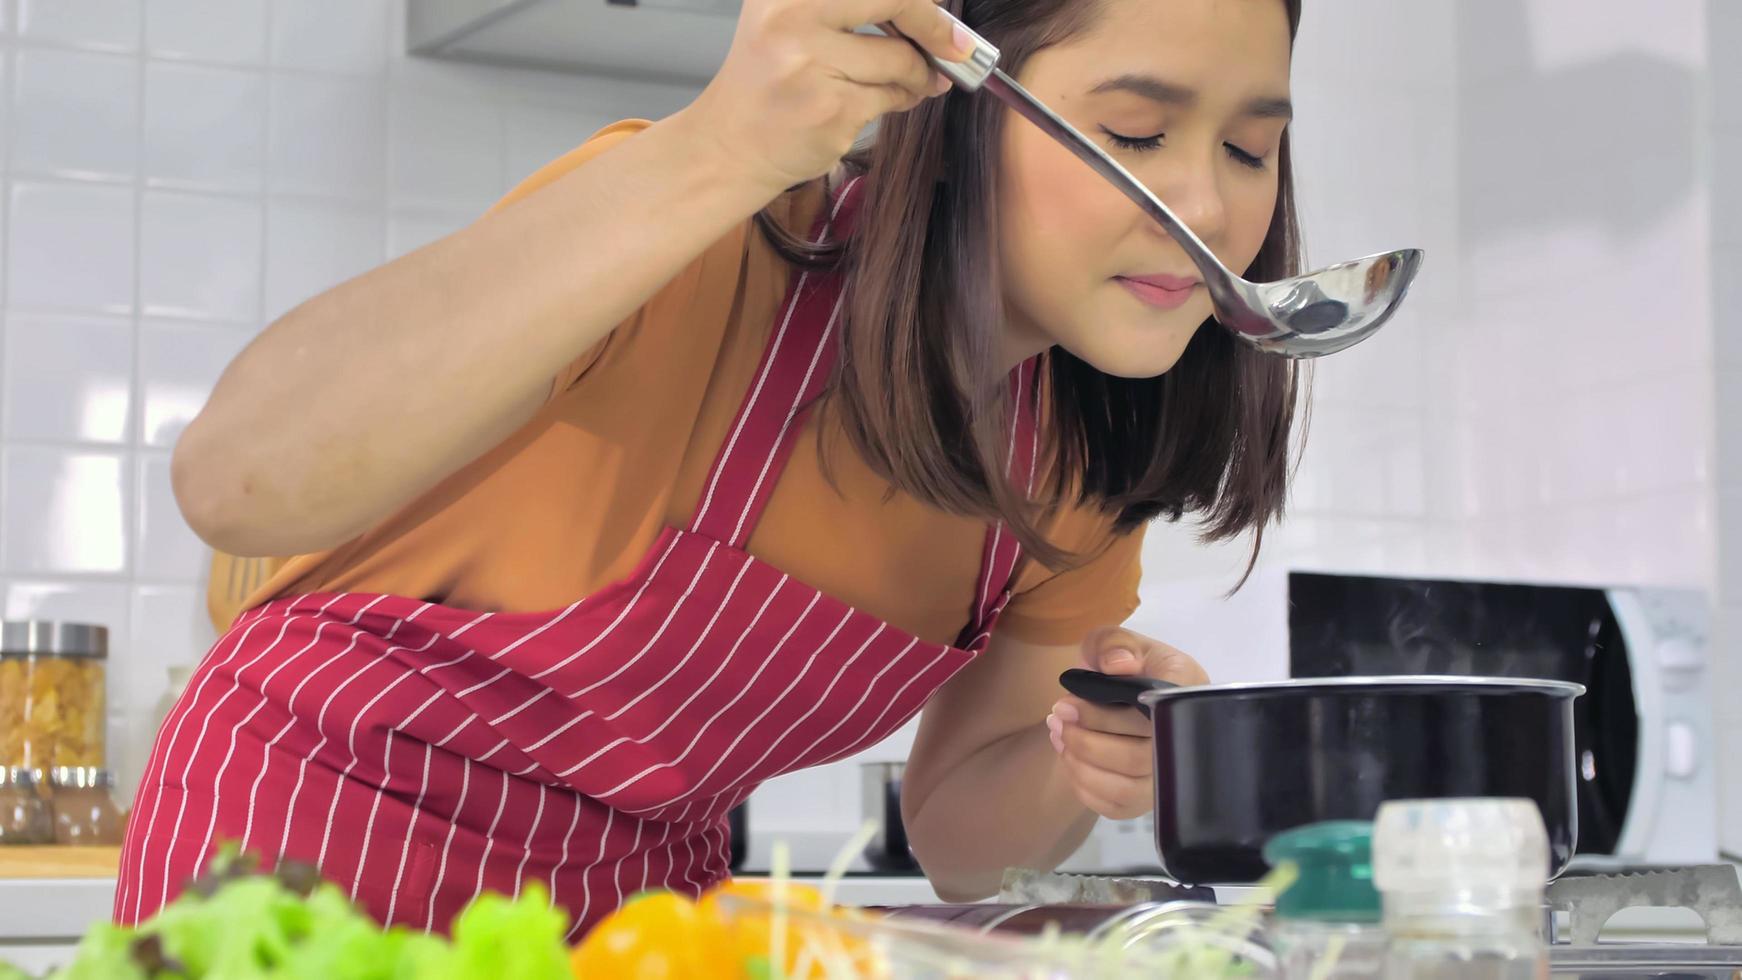 Young Asian woman cooking in kitchen at home. photo